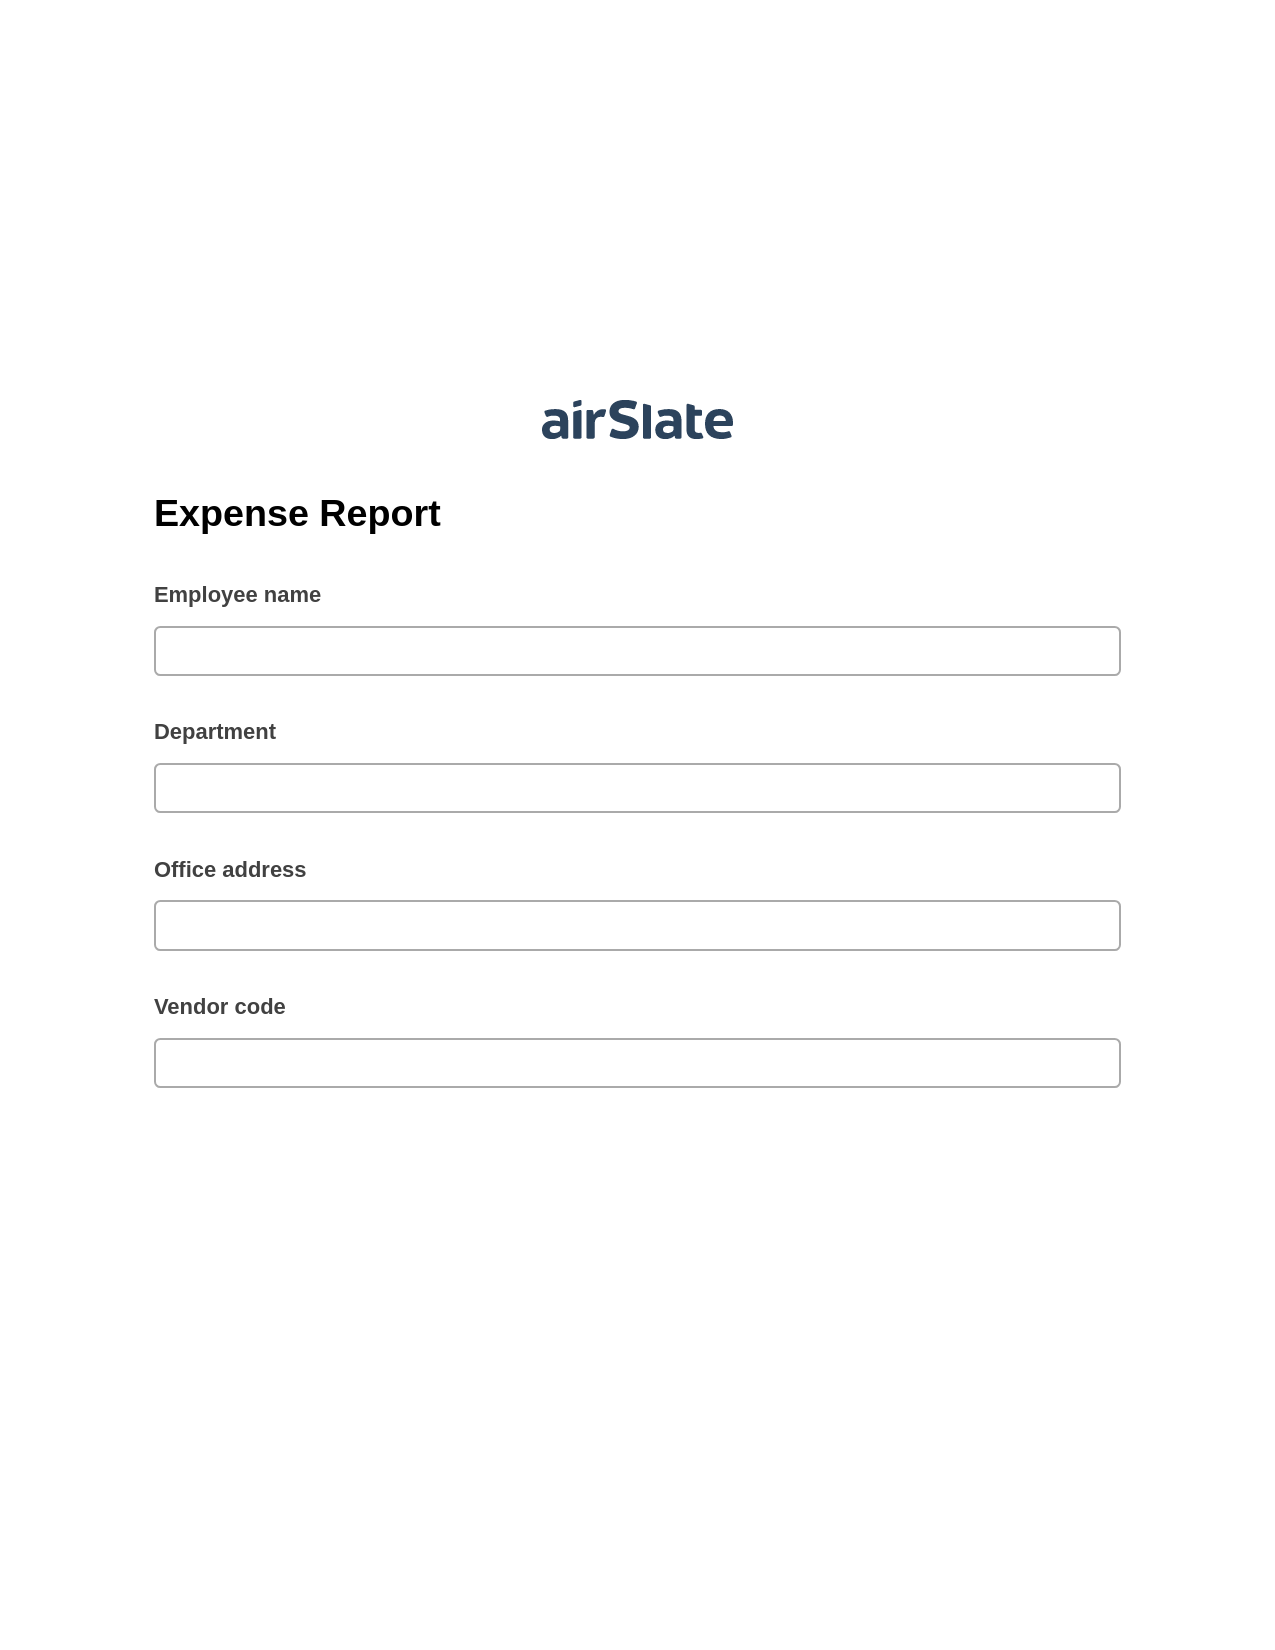 Expense Report Pre-fill from CSV File Bot, Export to MS Dynamics 365 Bot, Export to Smartsheet